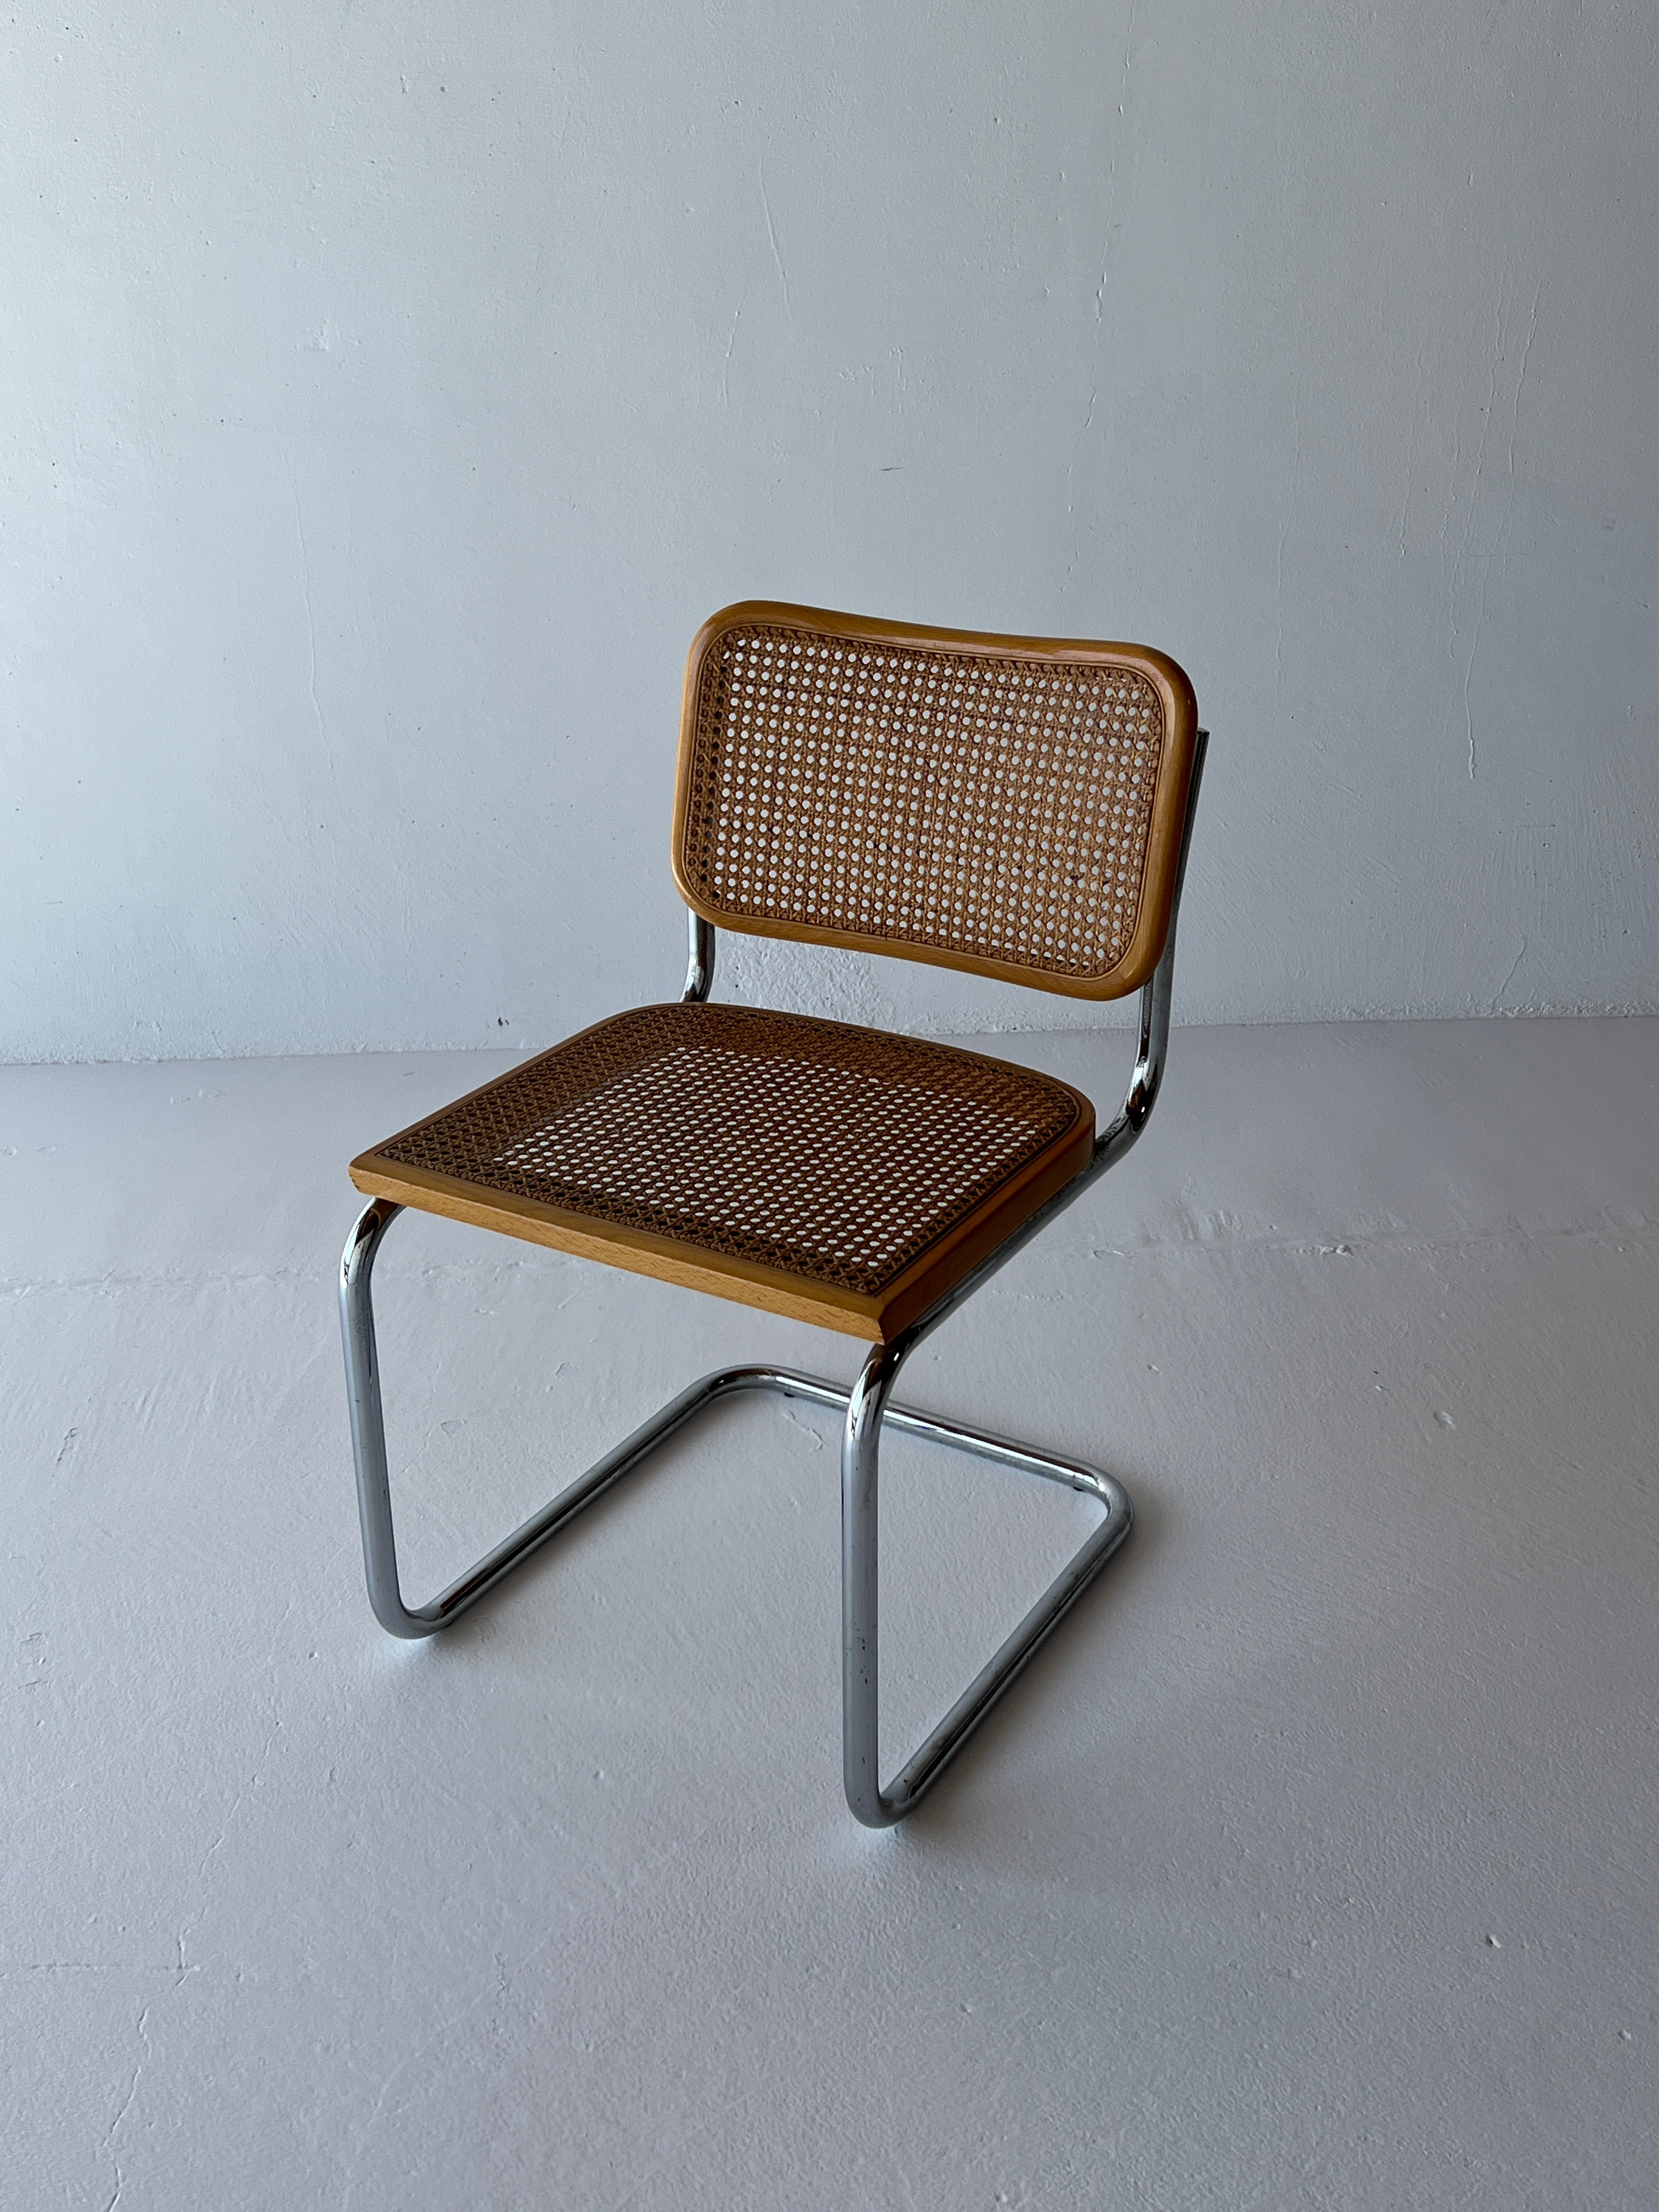 1970s Italian Cesca Chairs by Marcel Breuer for Cidue, Italy